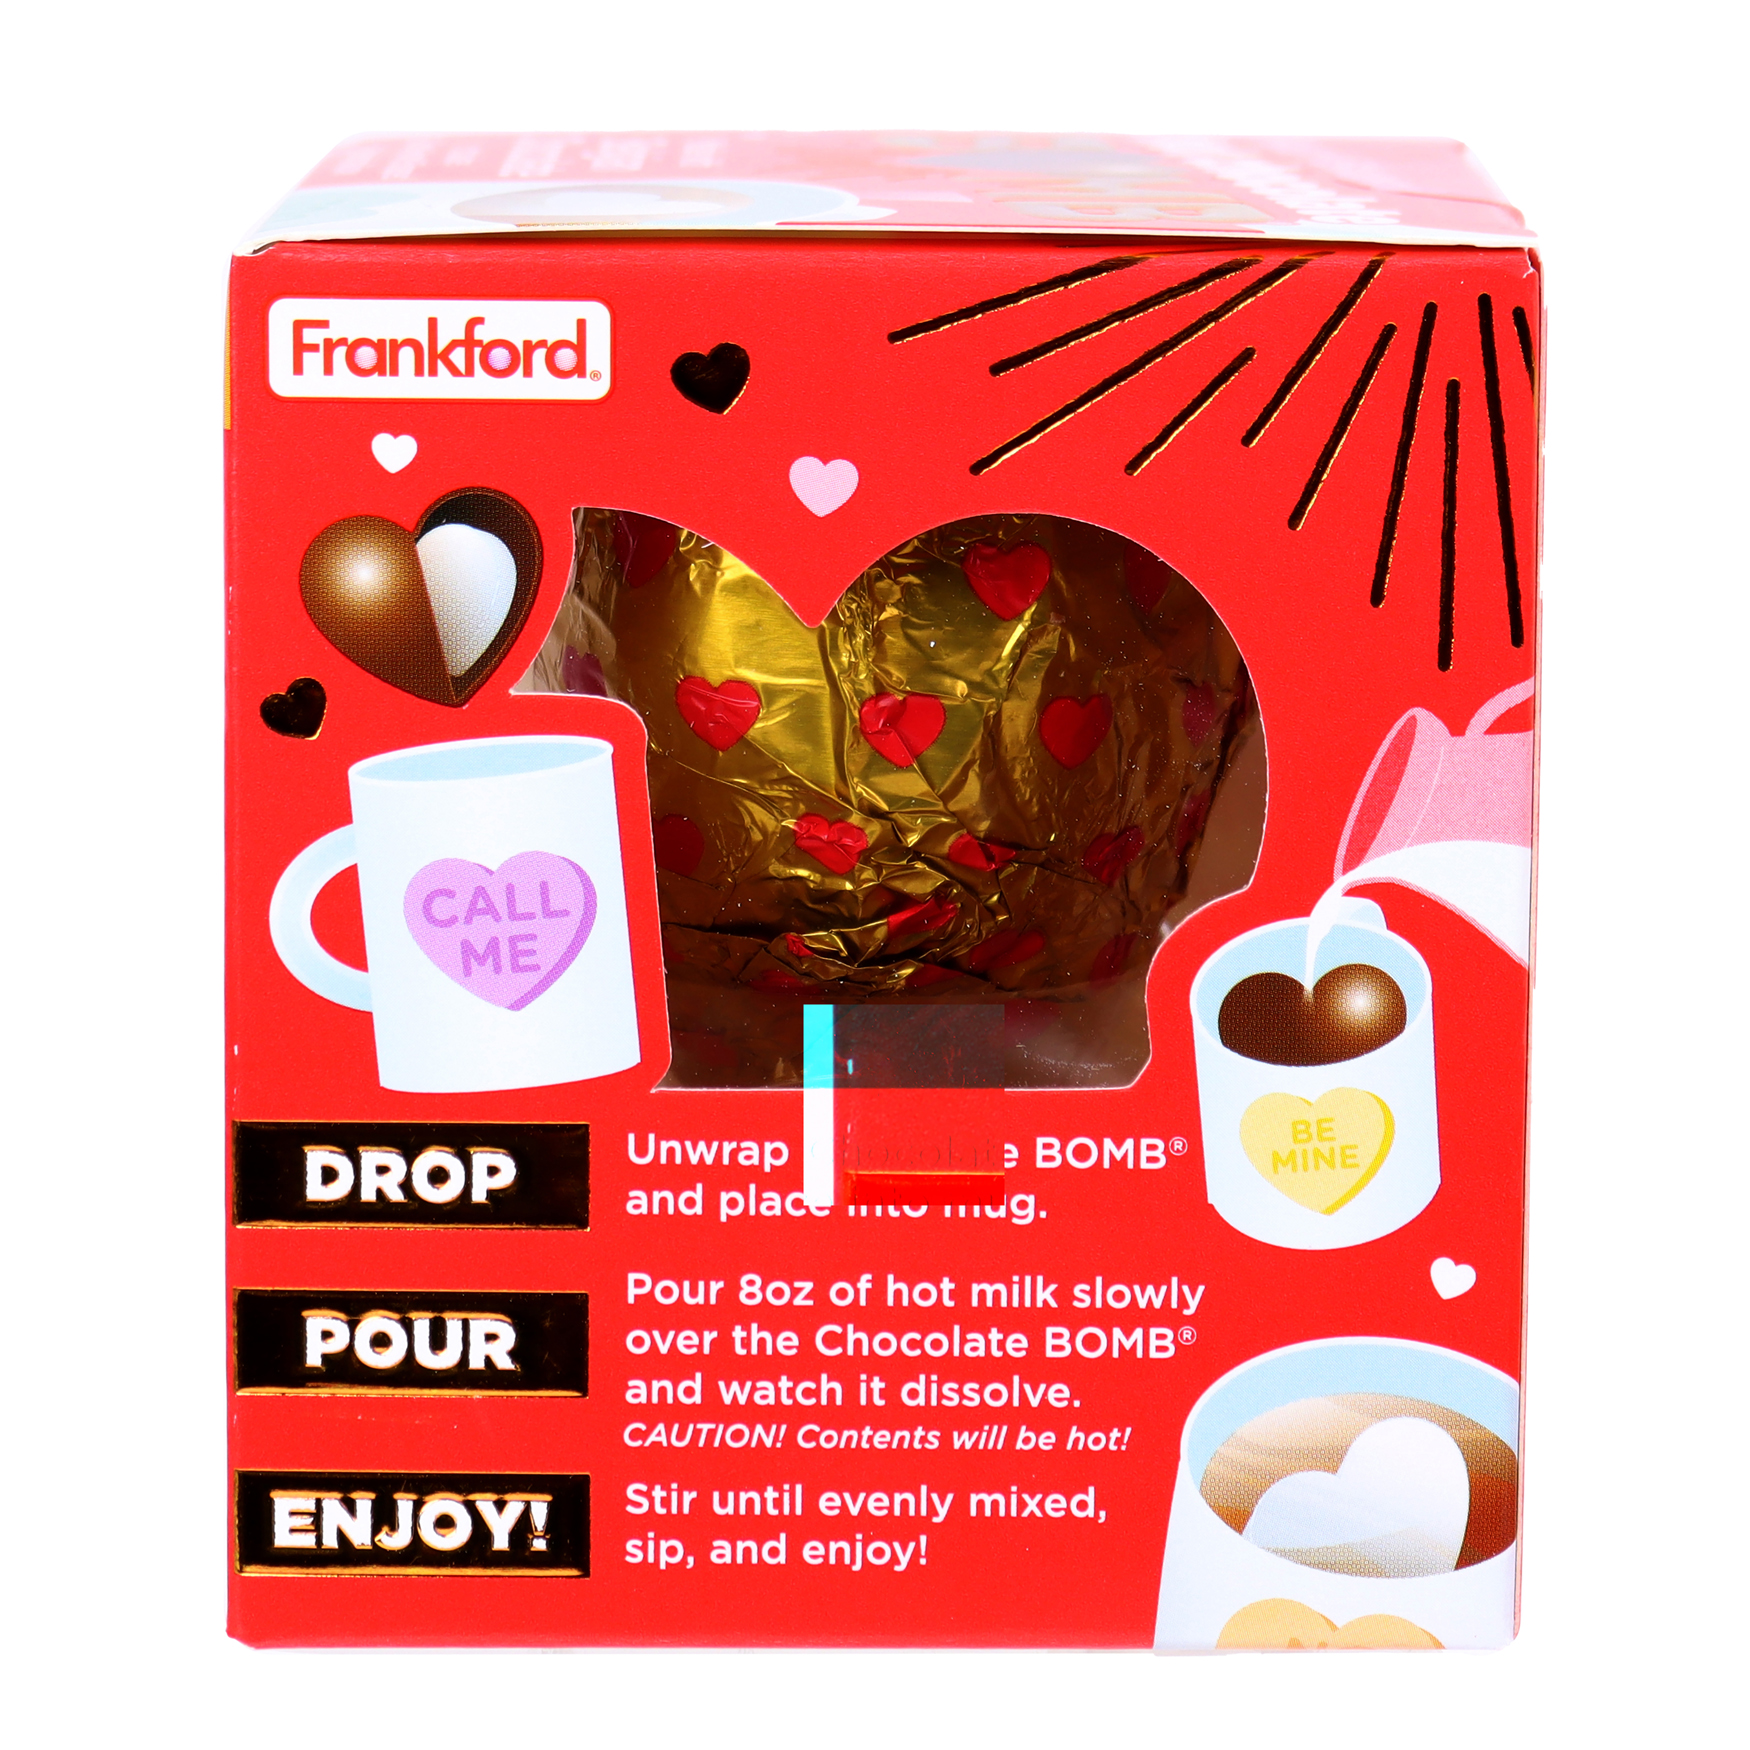 Frankford Valentine's Day Heart Milk Chocolate Bomb 1.6oz, 1 Count - image 5 of 7